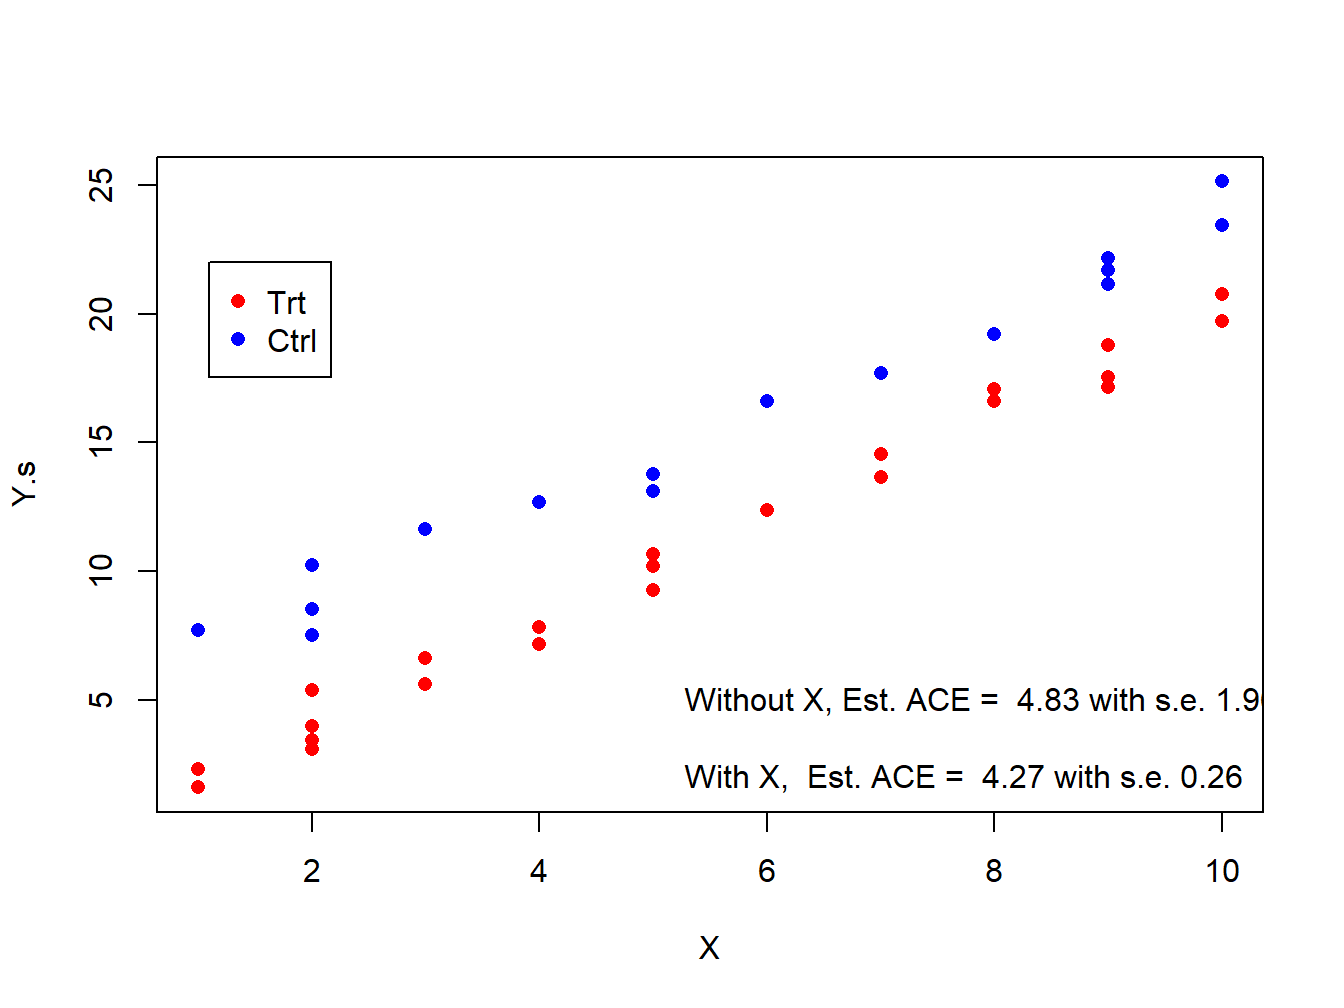 Estimation of ACE with and without adjusting for X under stratified randomization